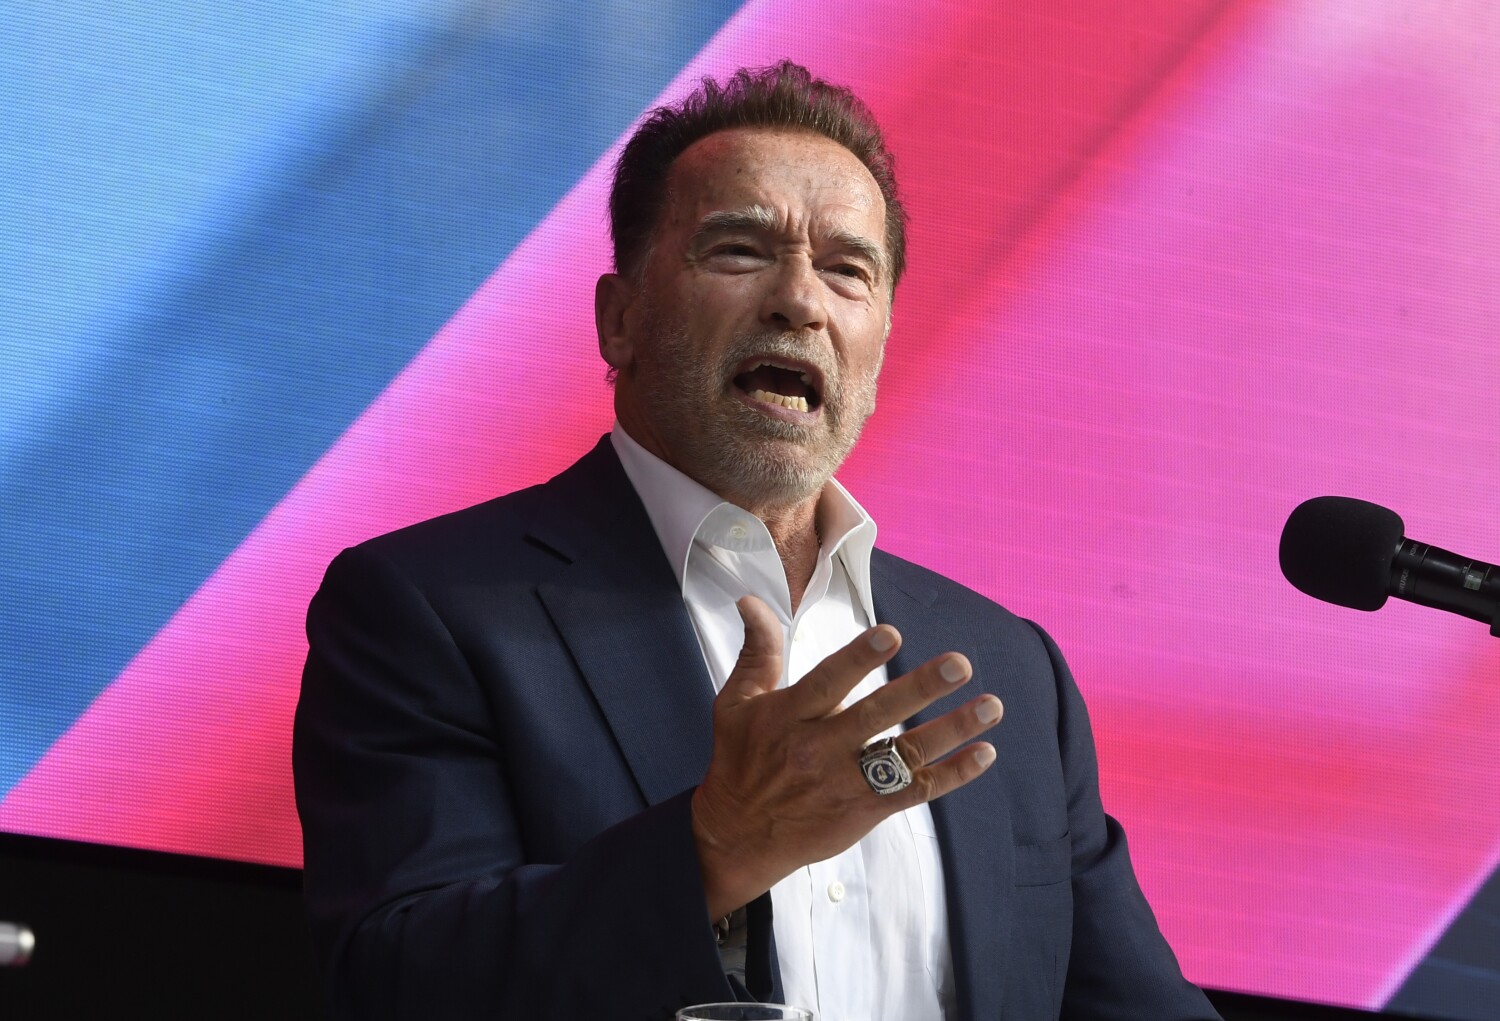 Arnold Schwarzenegger says voters were right to retain Newsom, calls GOP field 'disastrous'